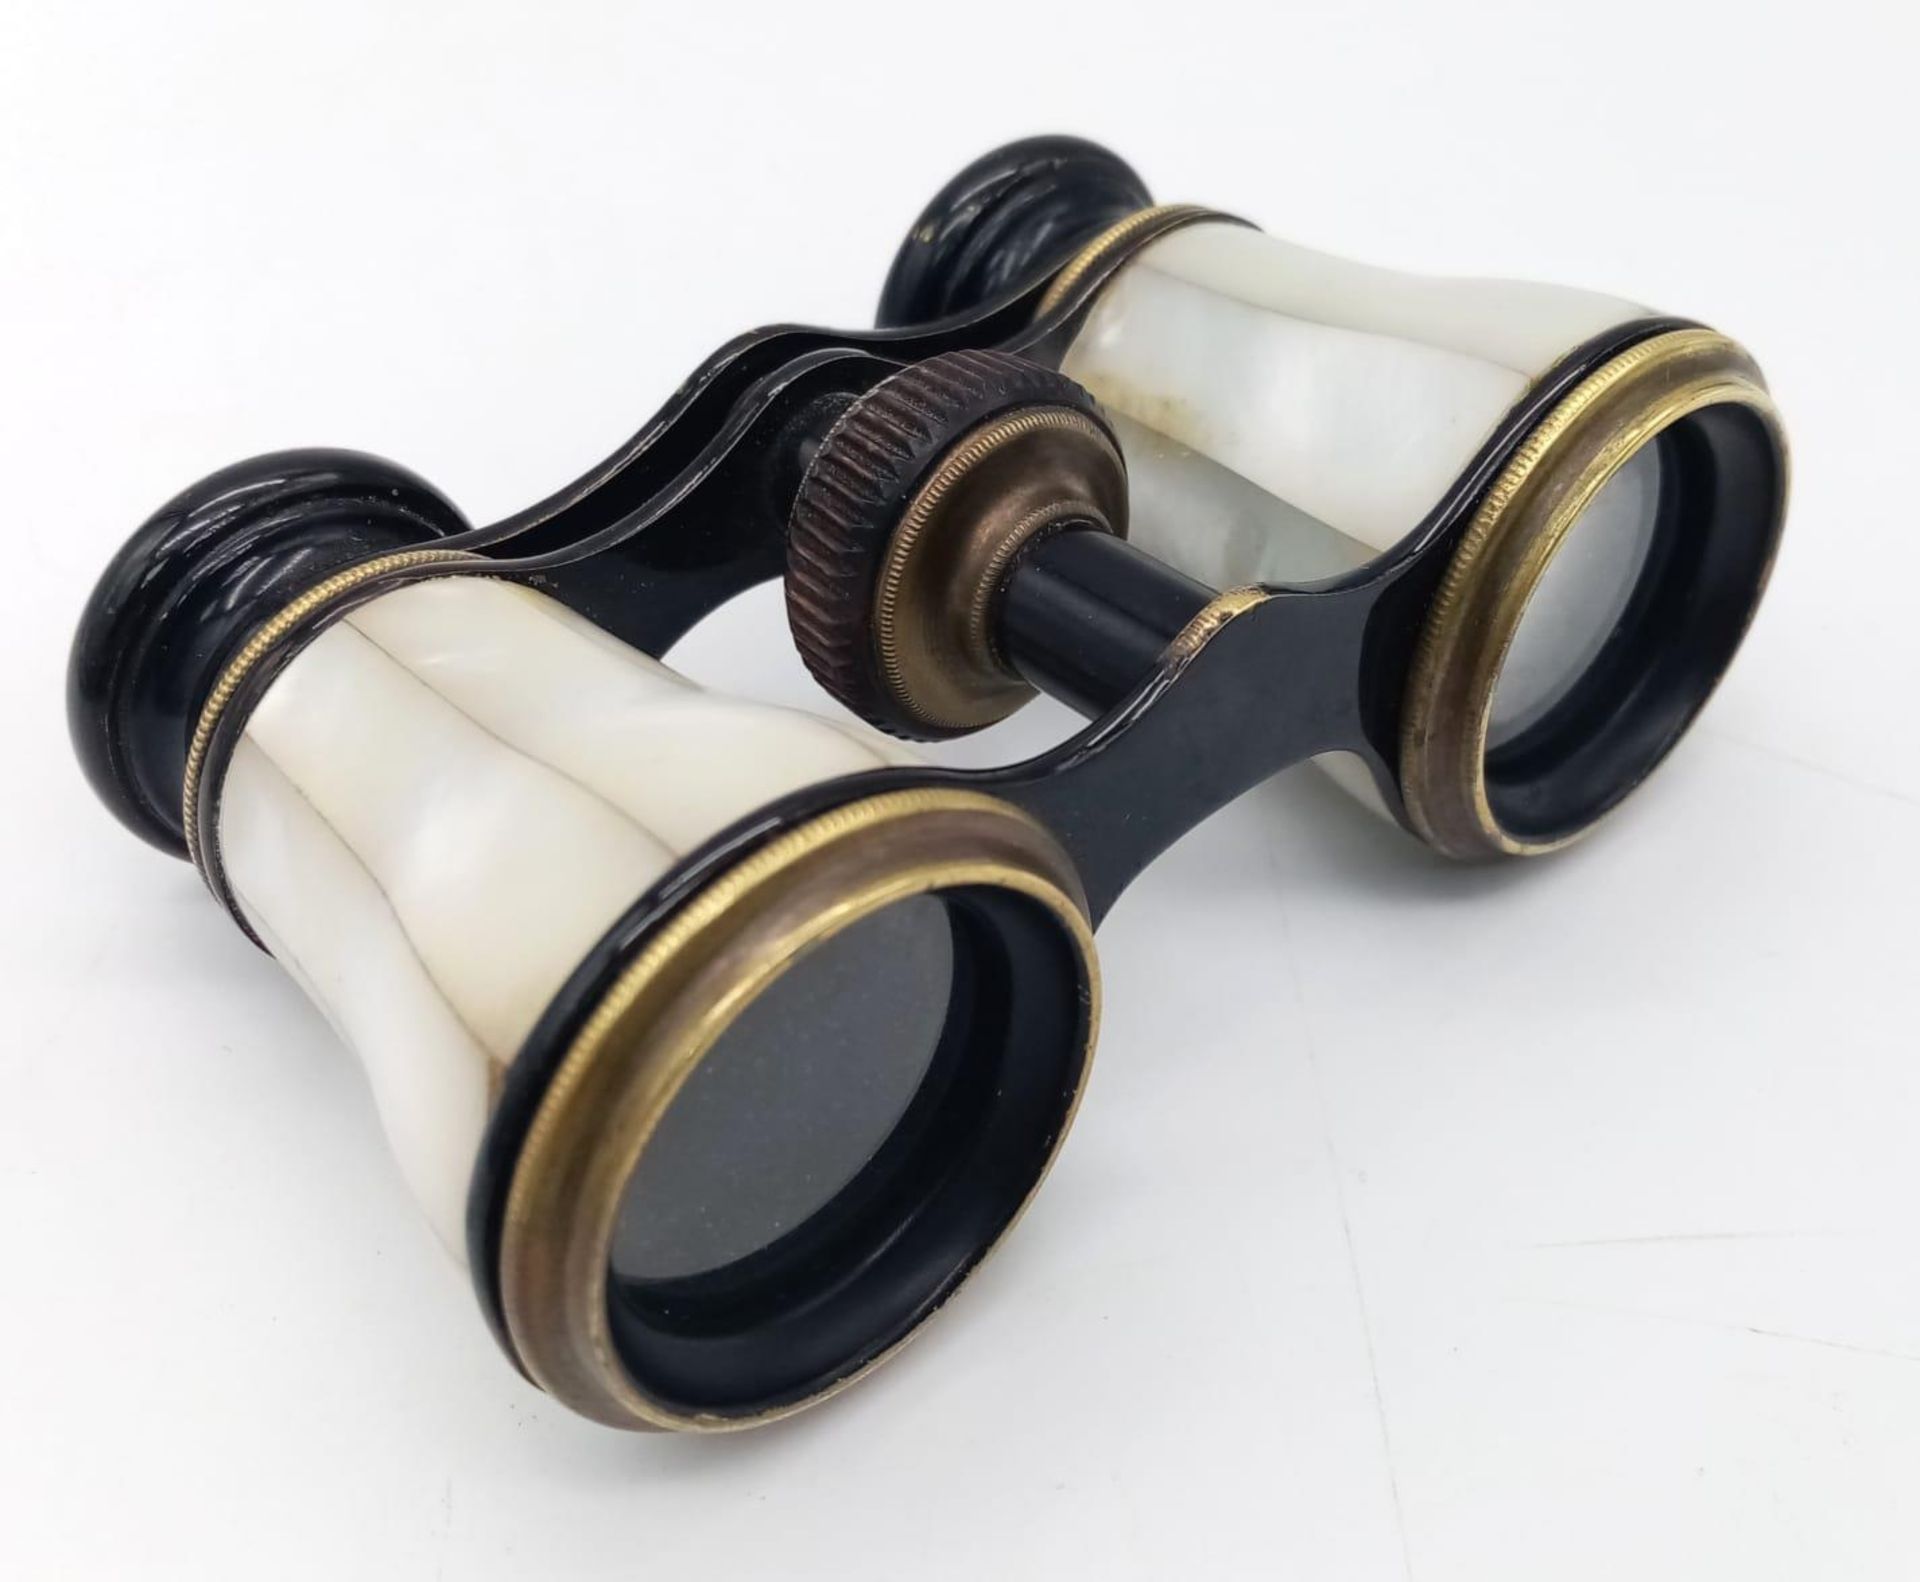 A BEAUTIFUL ANTIQUE OPERA BINOCULARS WITH MOTHER OF PEARL INLAY WORKING ORDER GREAT CONDITION